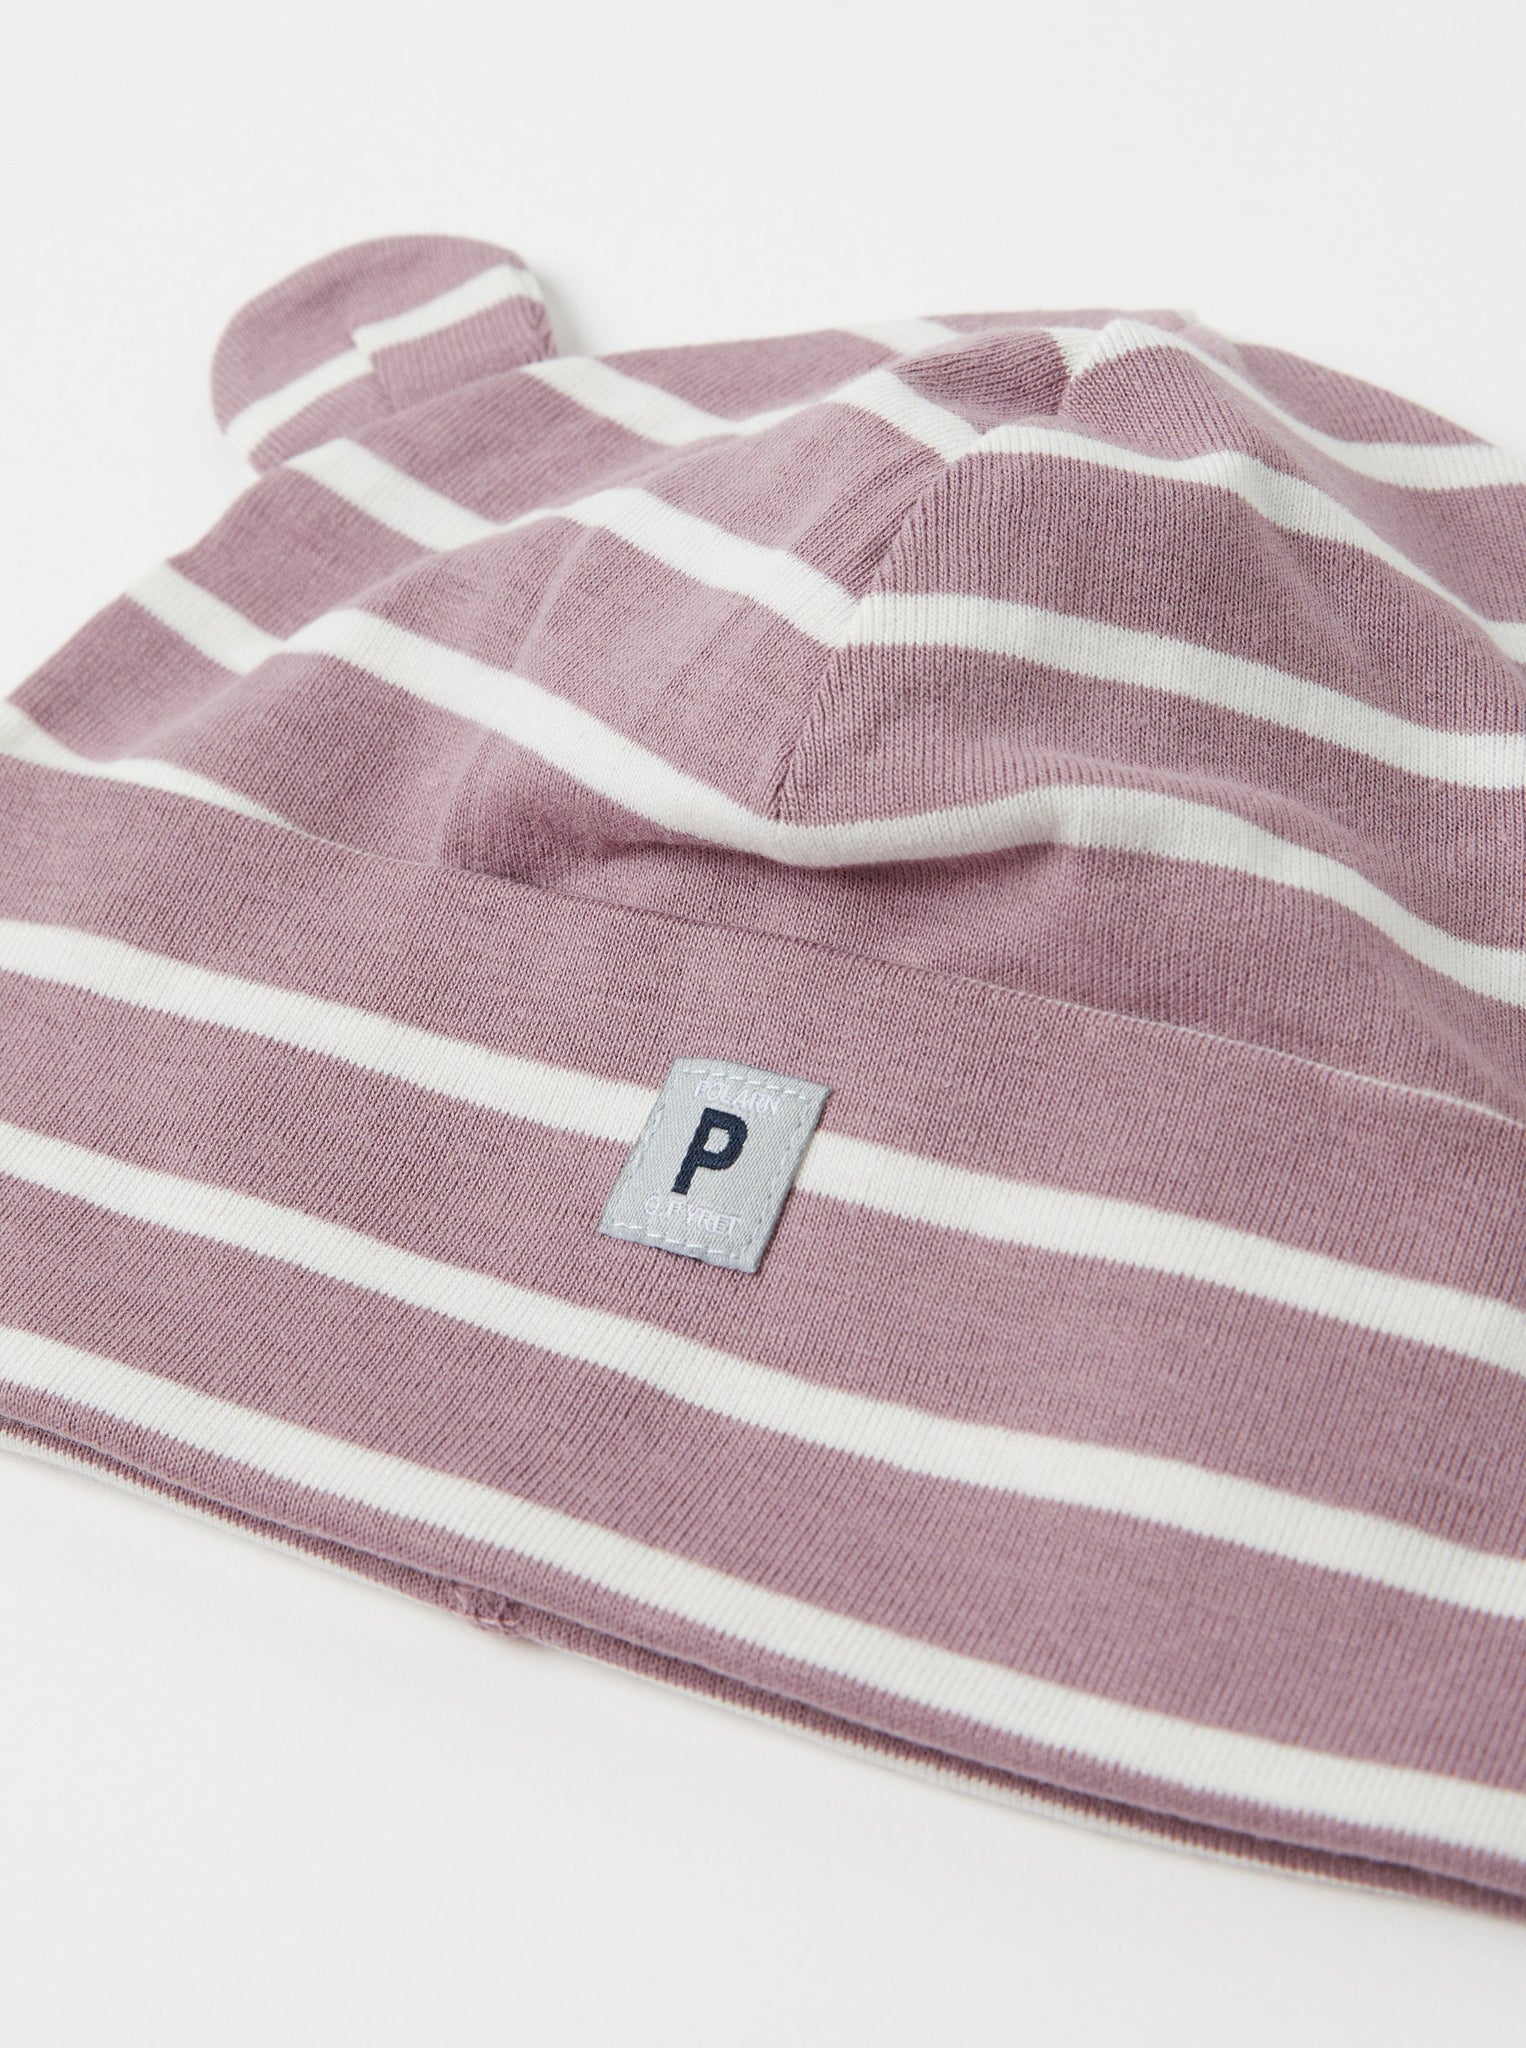 Organic Cotton Purple Baby Beanie Hat from the Polarn O. Pyret babywear collection. Nordic baby clothes made from sustainable sources.